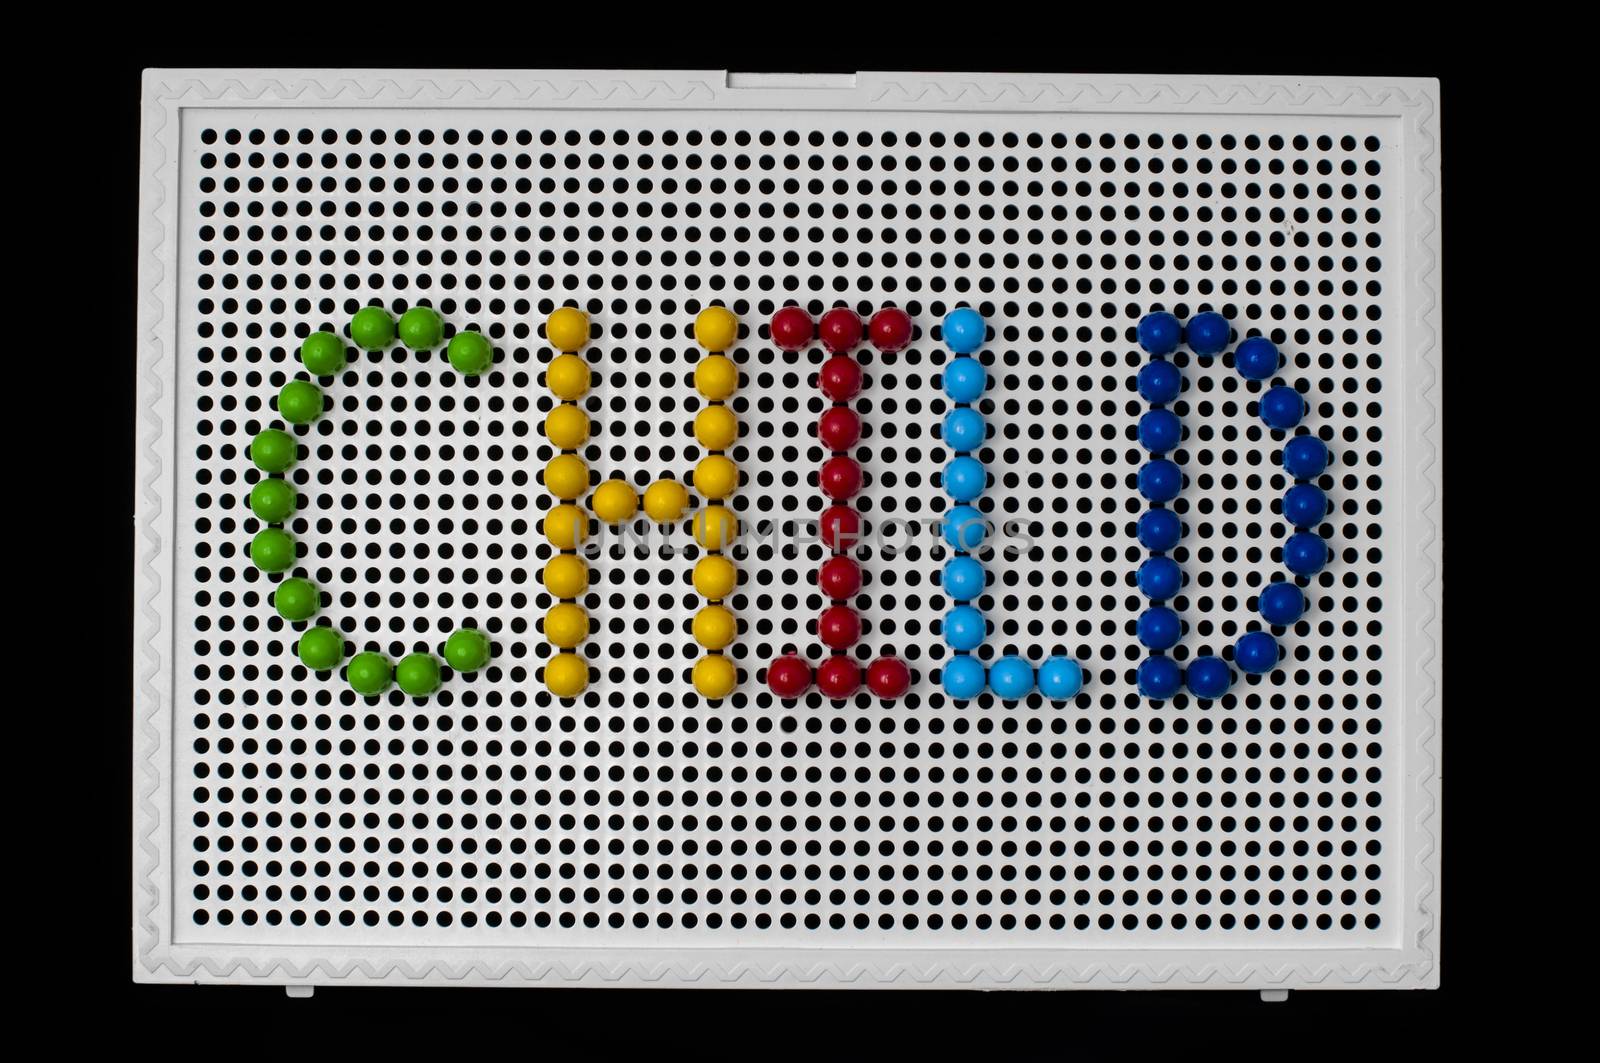 Text child on child mosaic. Colorful mosaic pieces